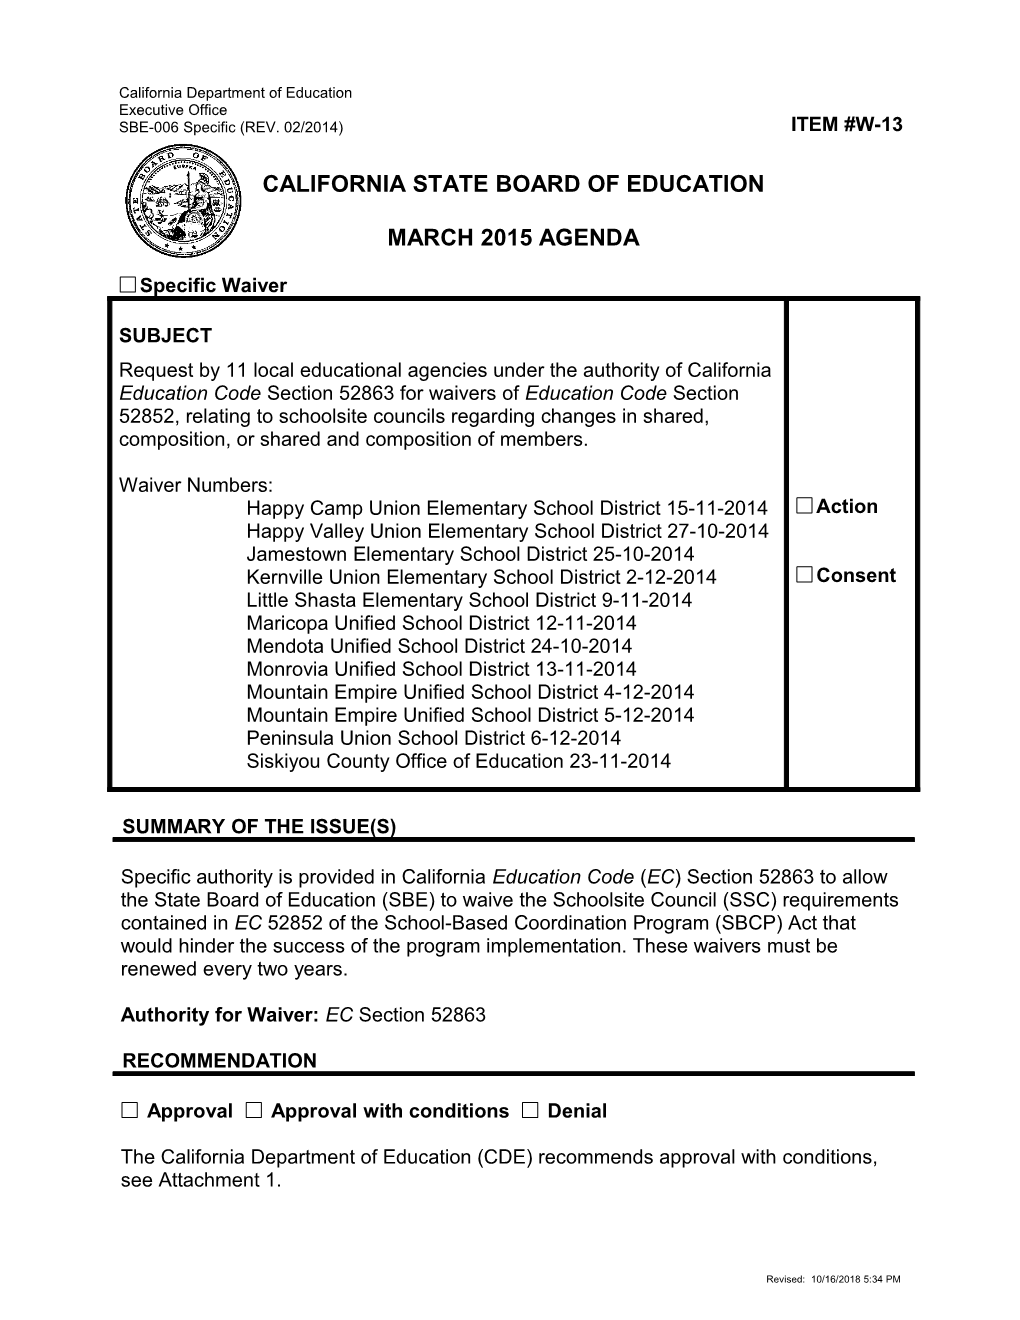 March 2015 Waiver Item W-13 - Meeting Agendas (CA State Board of Education)